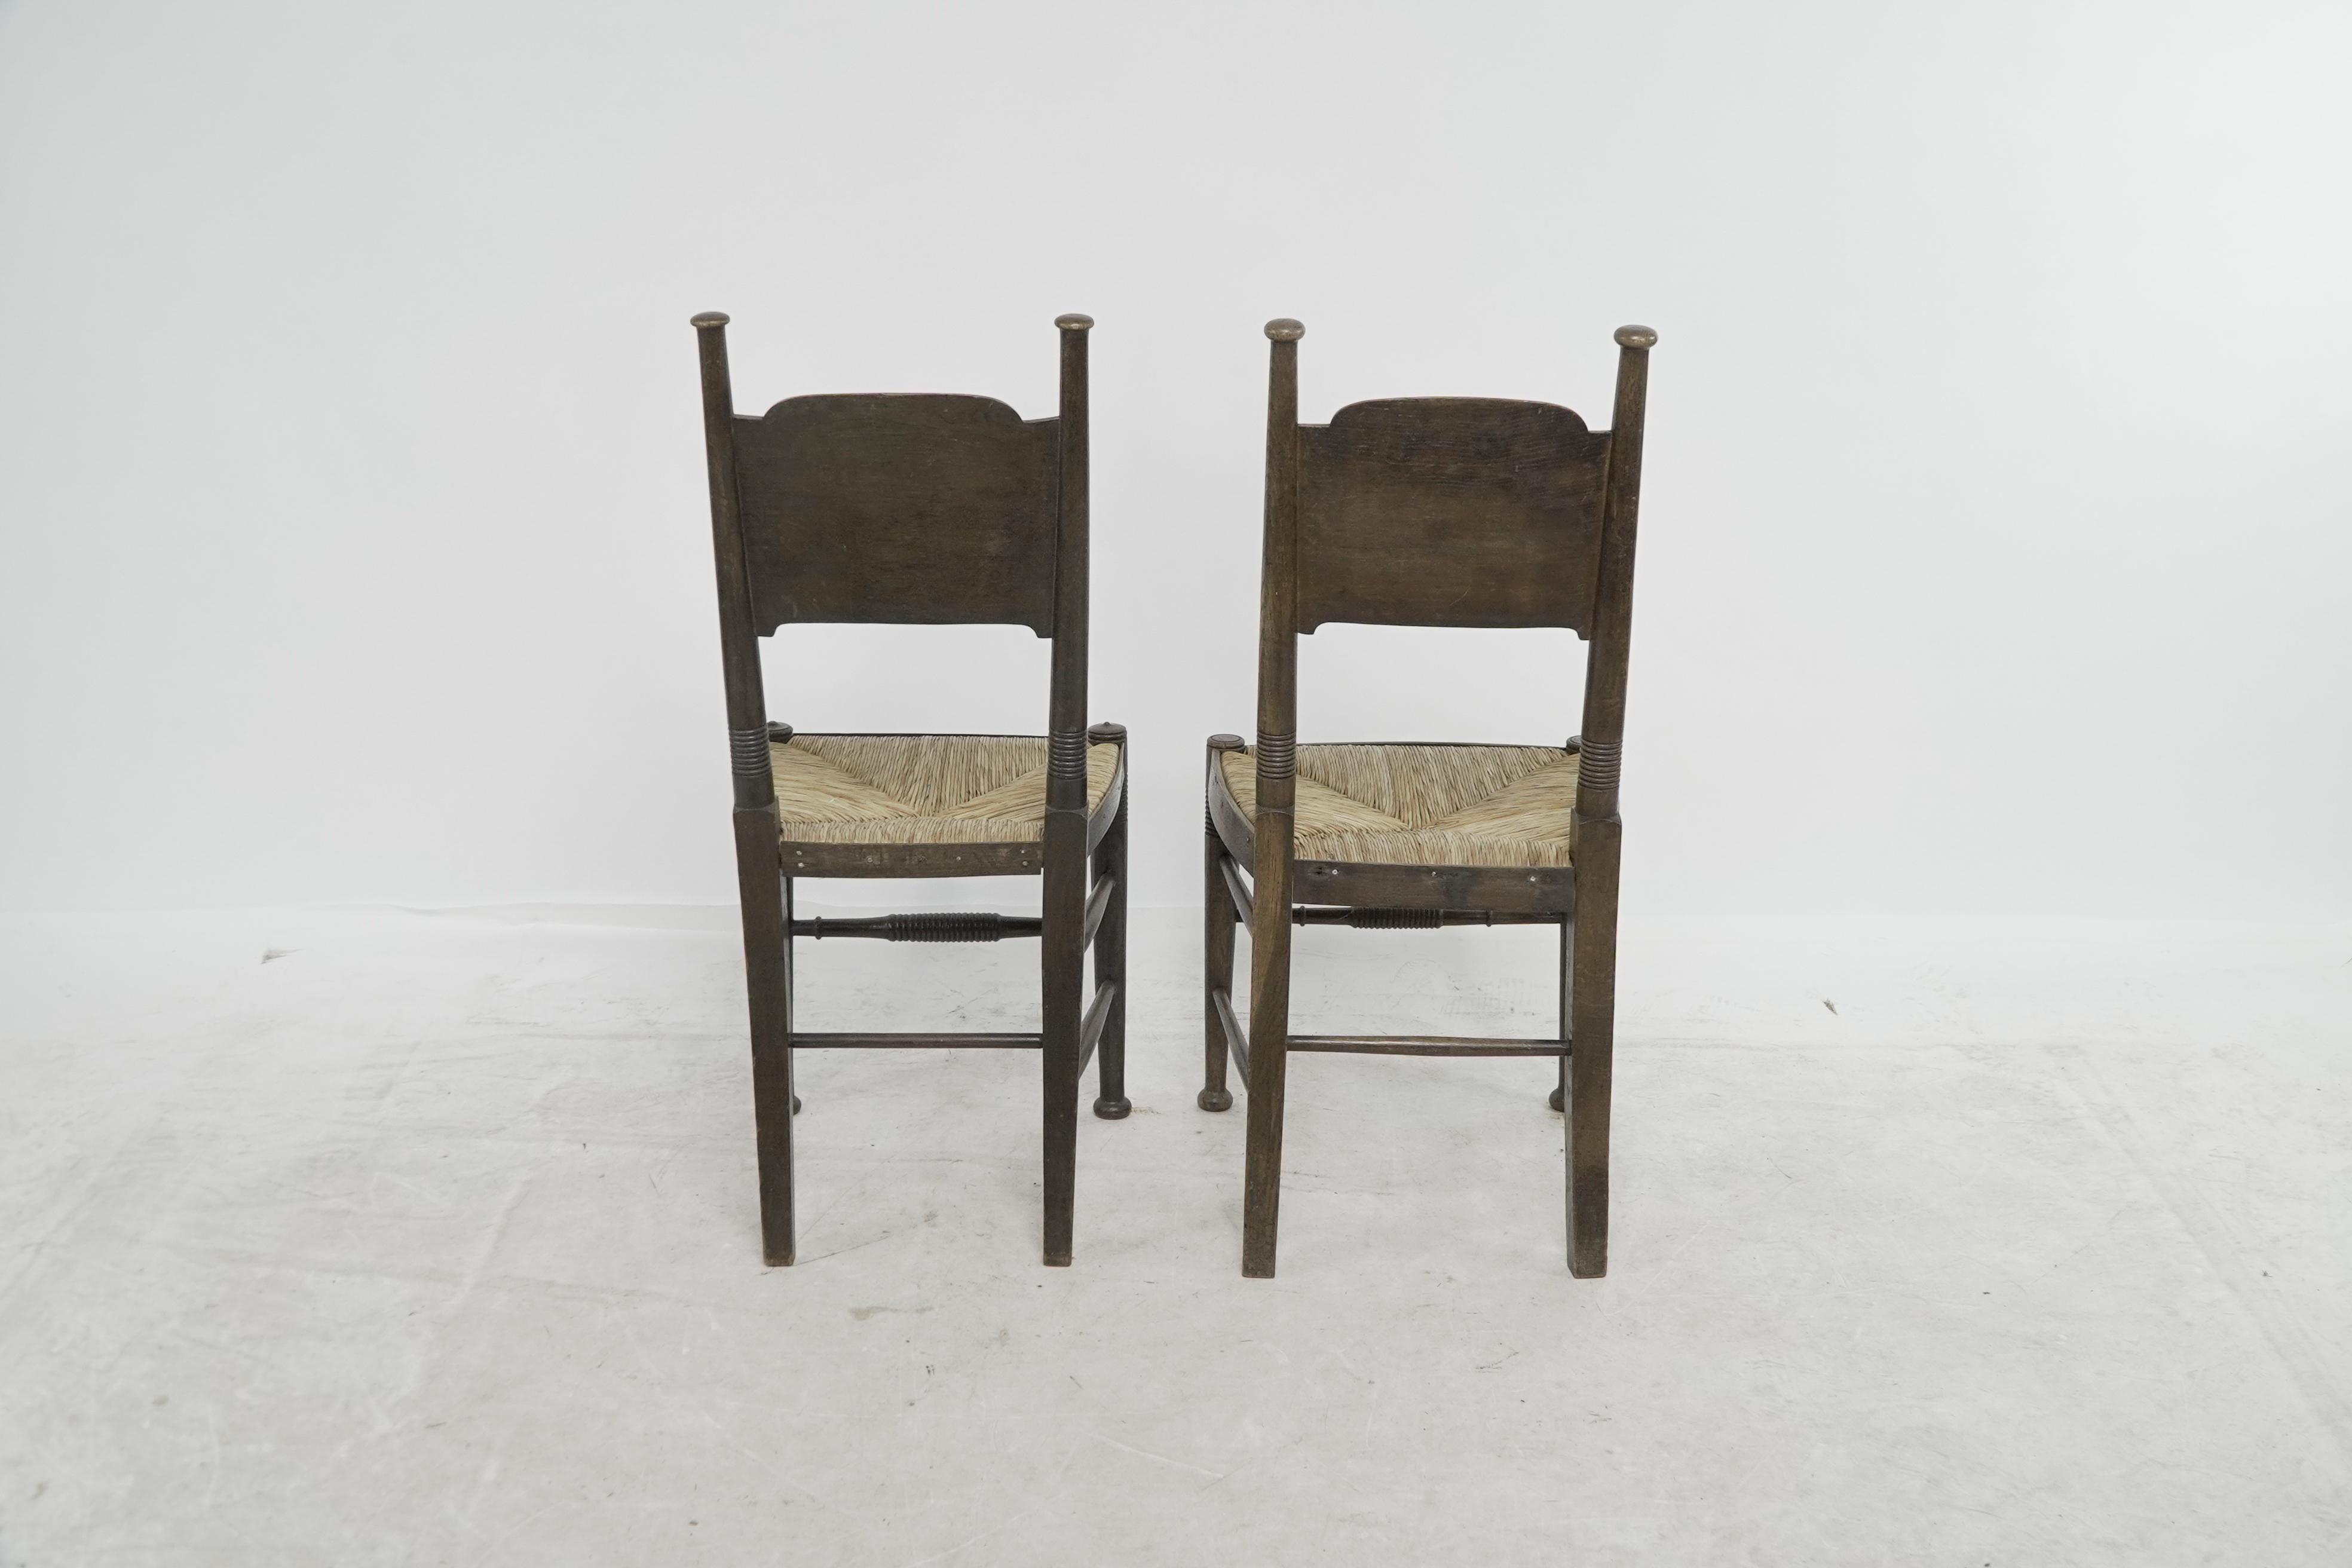 William Birch, retailed by Liberty & Co. Pair of Arts & Crafts oak dining chairs For Sale 11